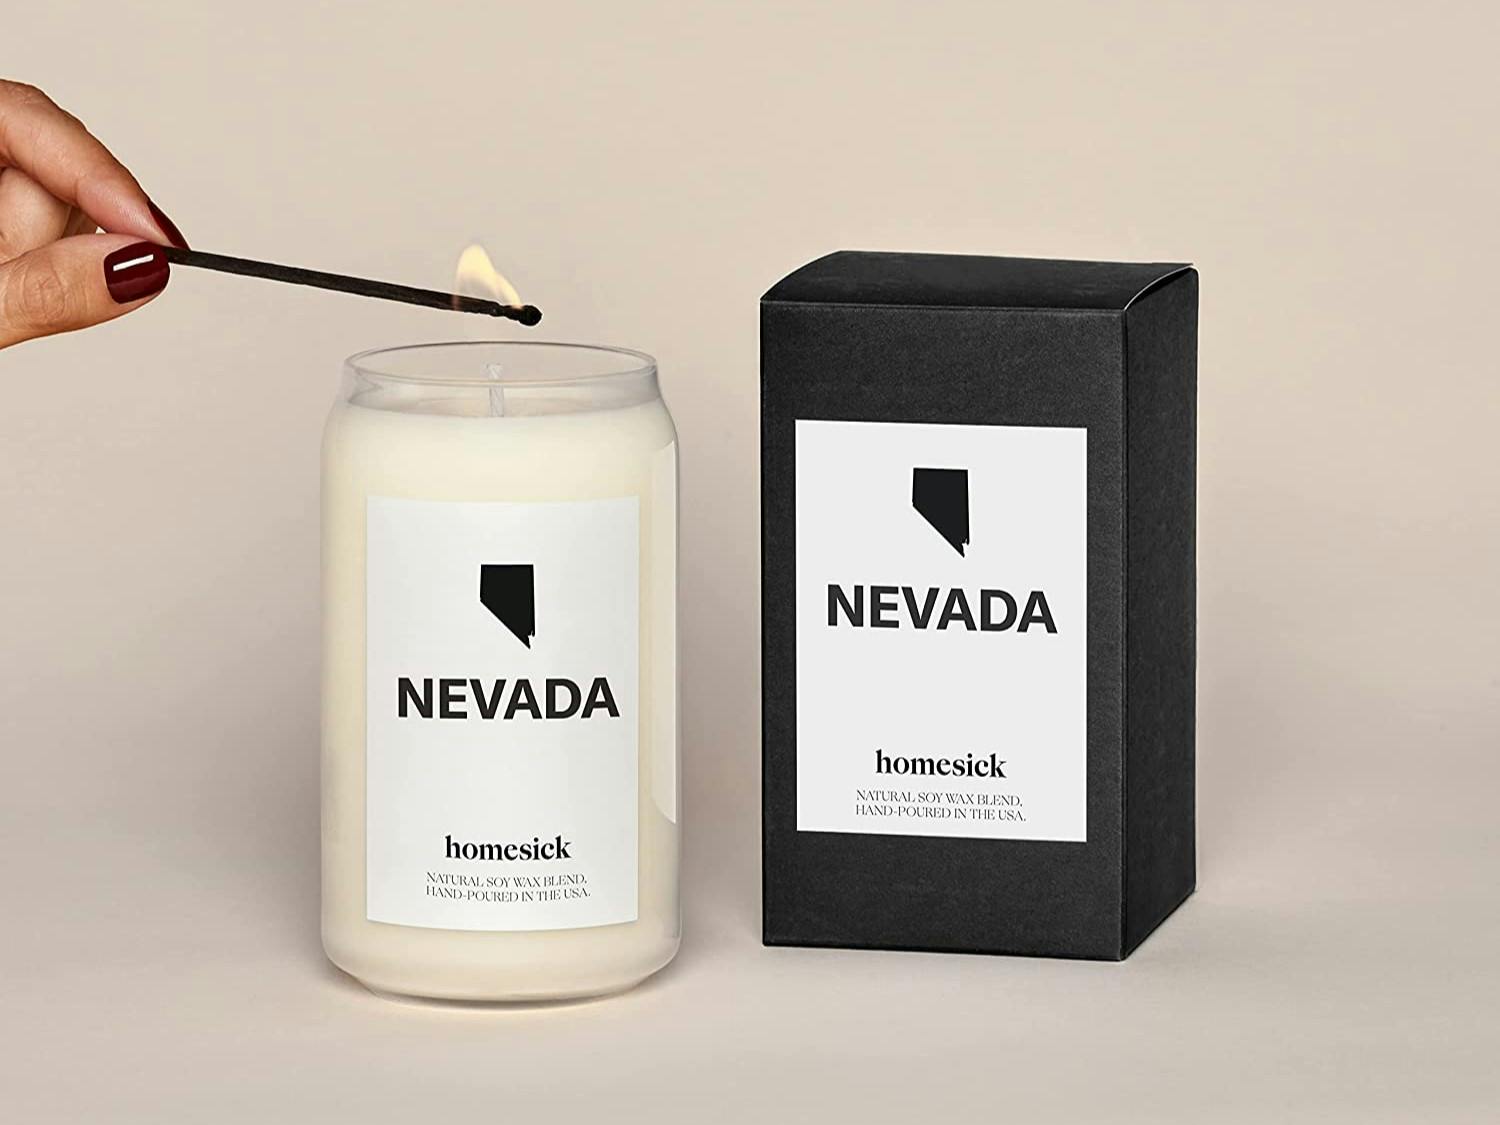 LimitedTime Deals on Homesick Candles & More at Amazon The Krazy